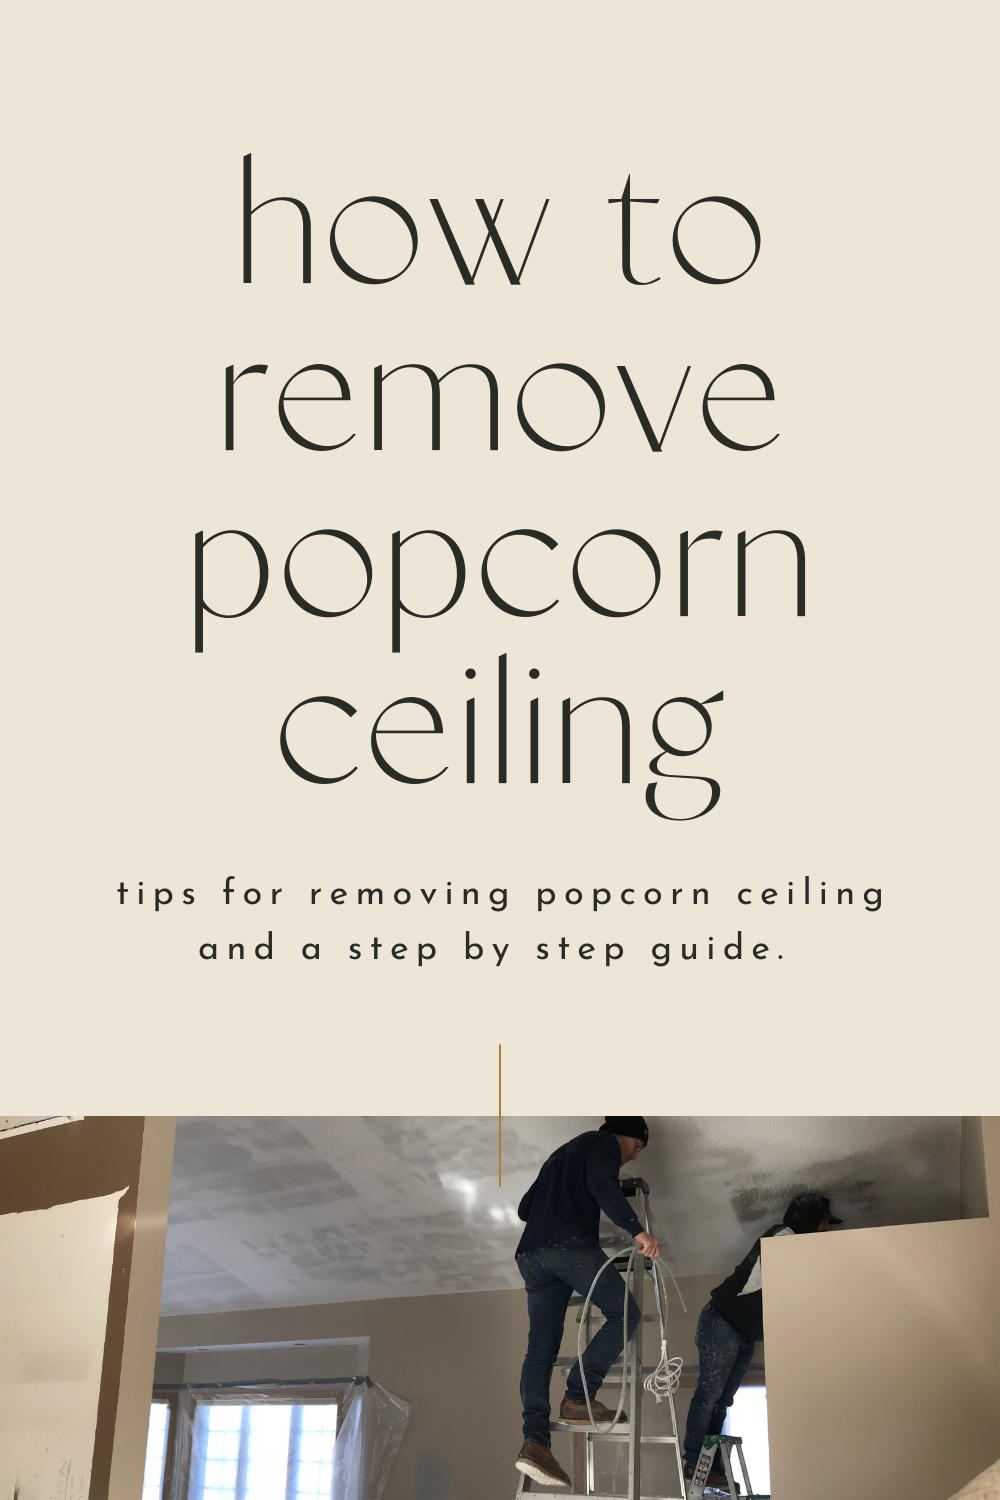 7 Steps to Remove Popcorn Ceilings 2